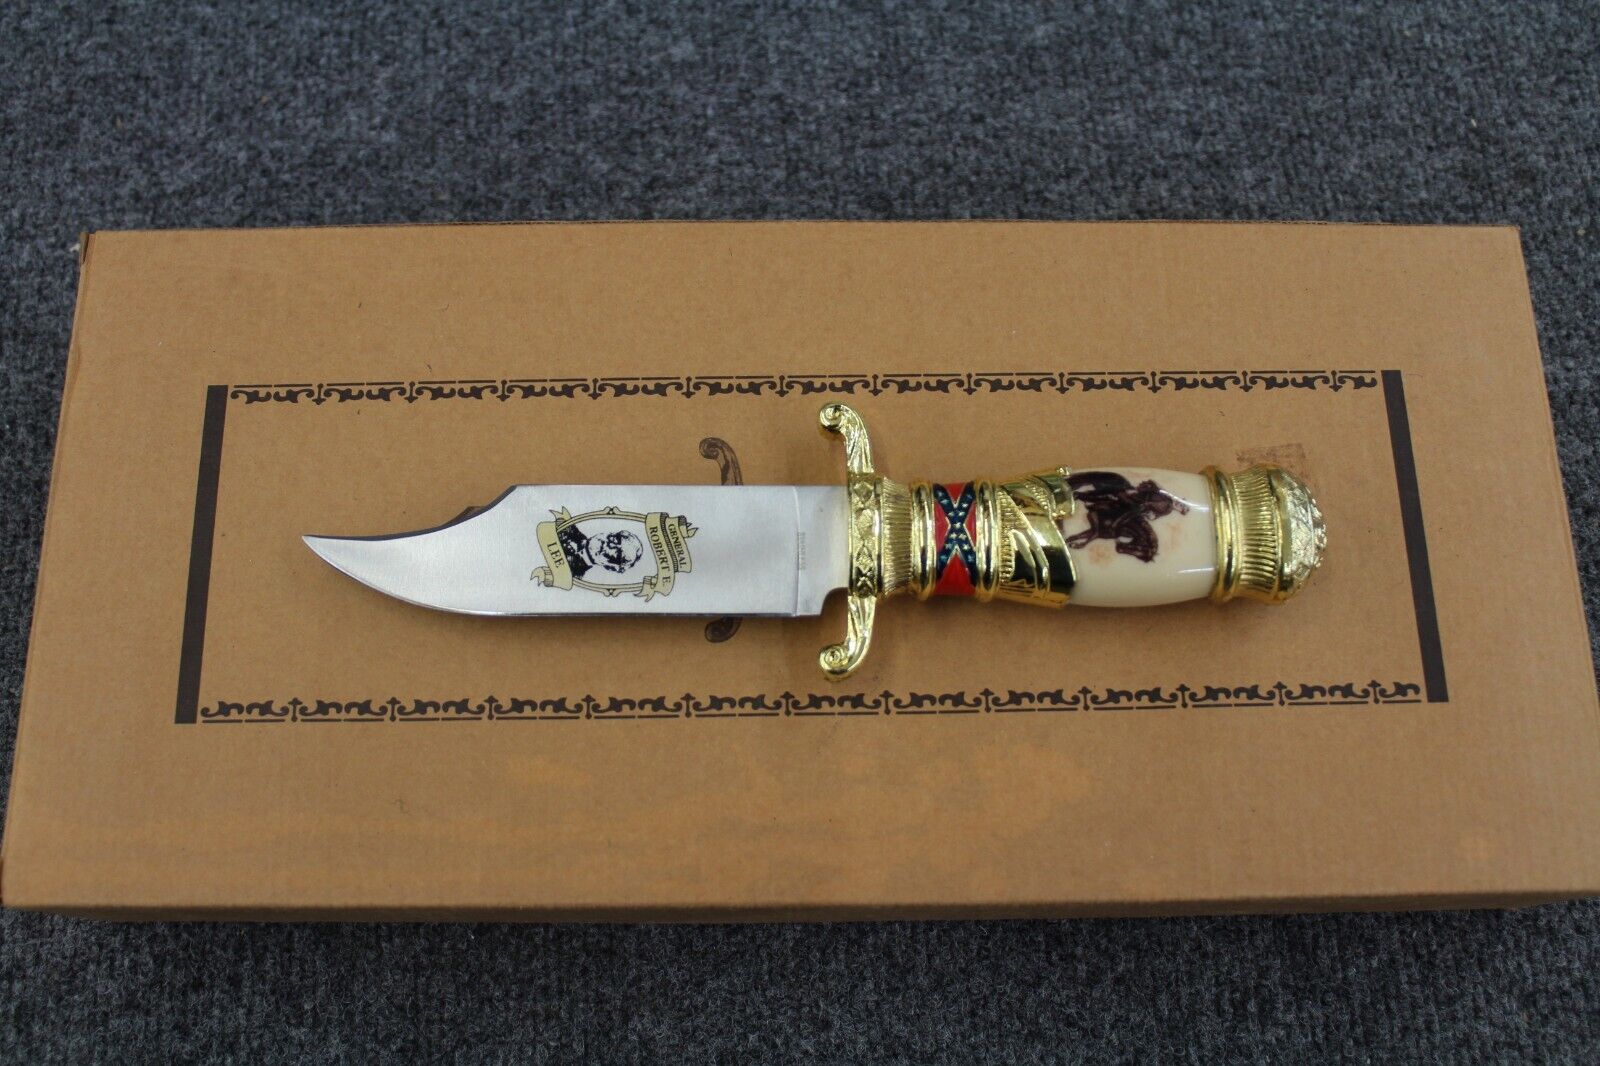 Confederate General Robert E. Lee Knife w/ Box (Preowned)